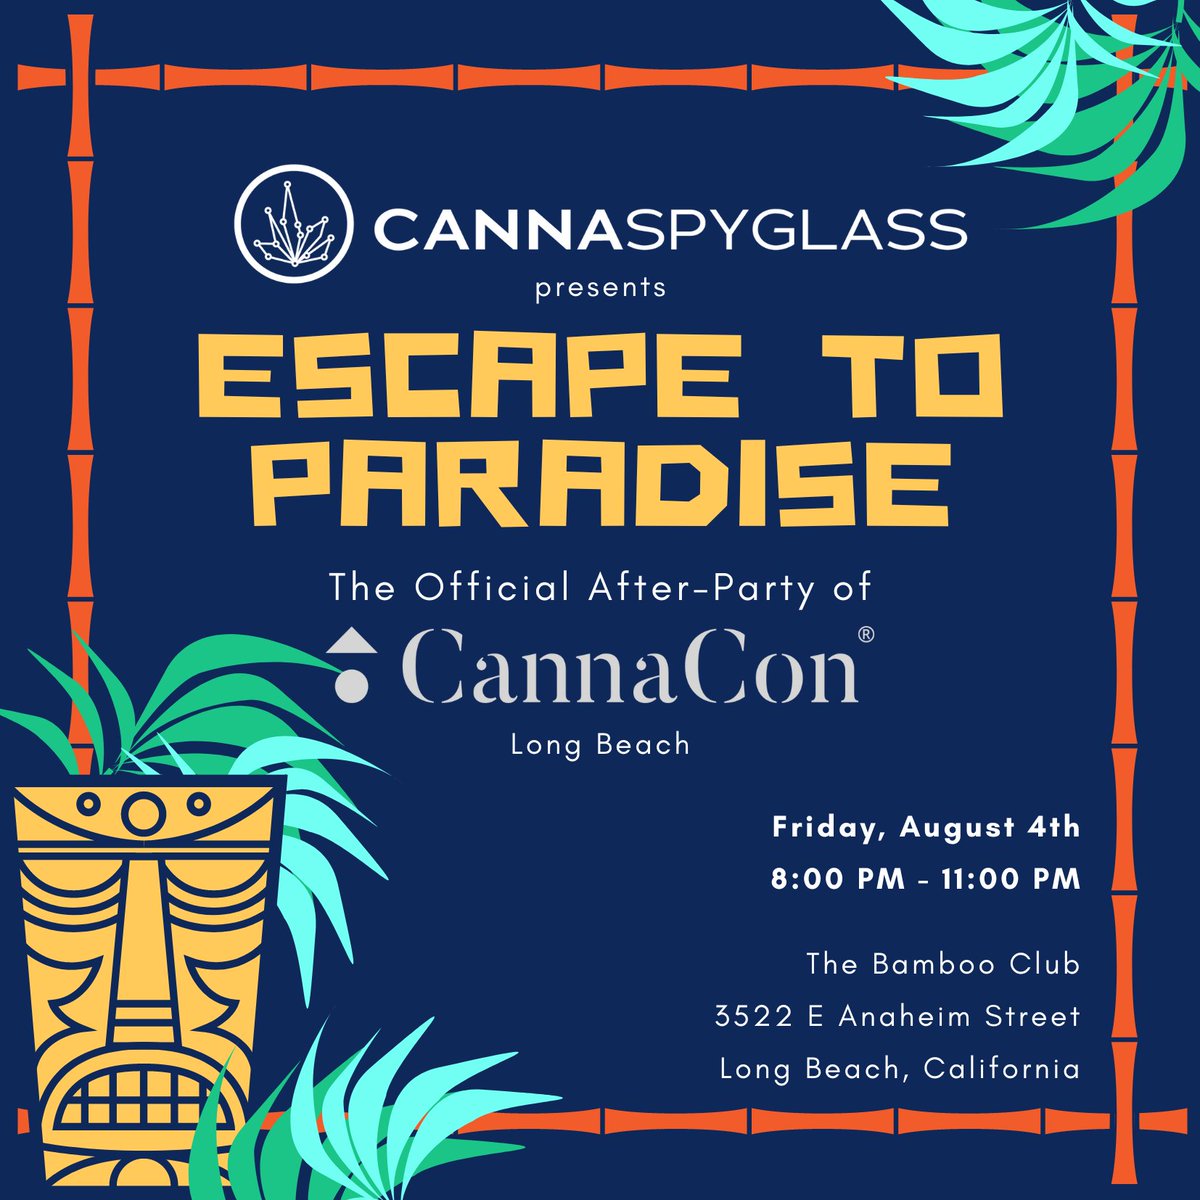 We are proud to be the official sponsor of the CannaCon West after party! Escape to Paradise with us and enjoy mingling with some of the industry's most passionate professionals!

Reserve your FREE tickets here - bit.ly/3pXM5Aw 

#cannabis #cannabisparty #cannabisevent